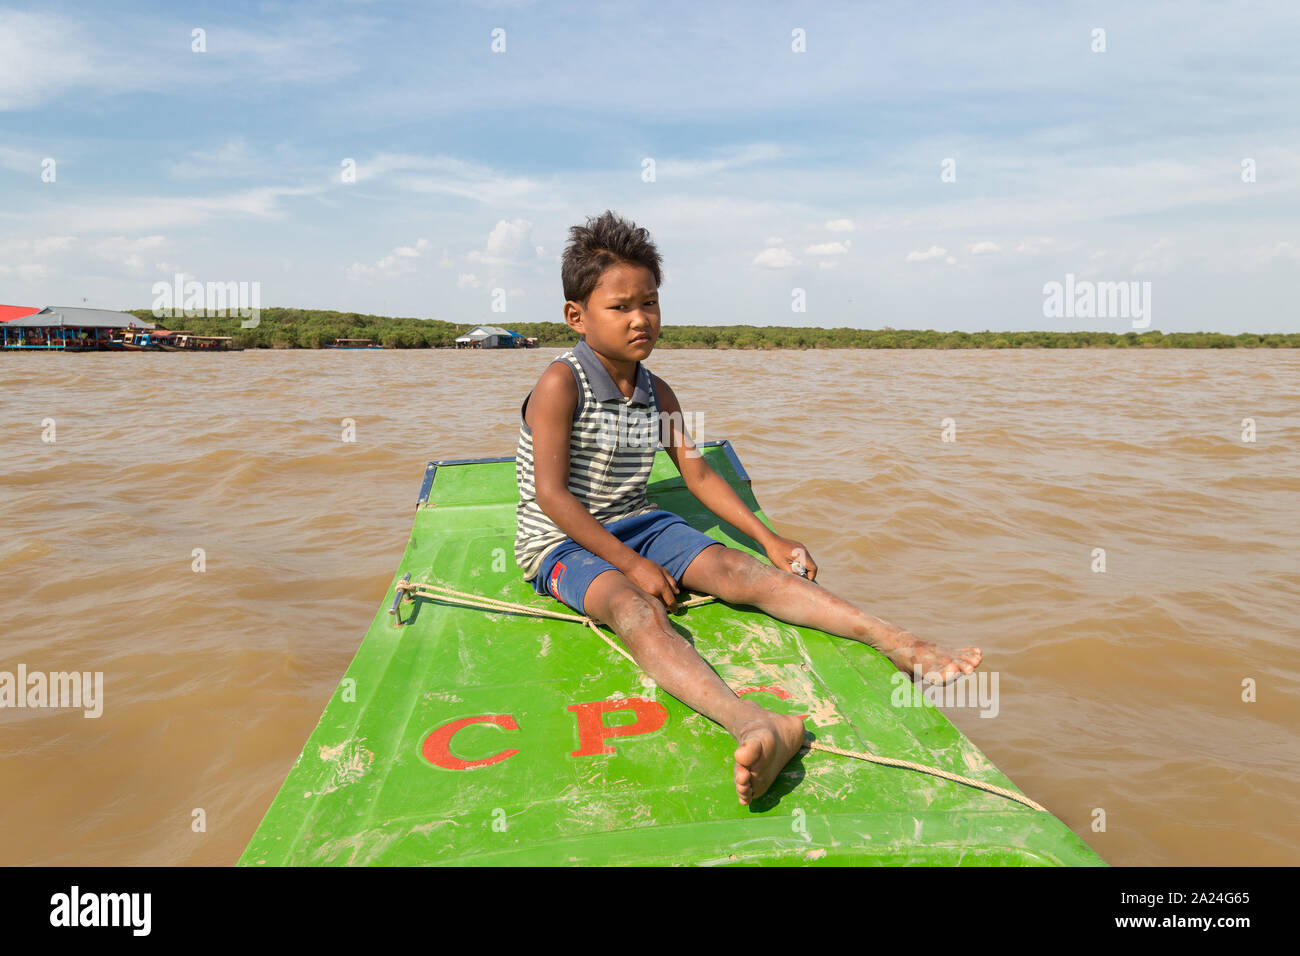 Siem Reap, Cambodia - January 31, 2017: Cambodian poor boy sitting on old tourist boat in the river Stock Photo